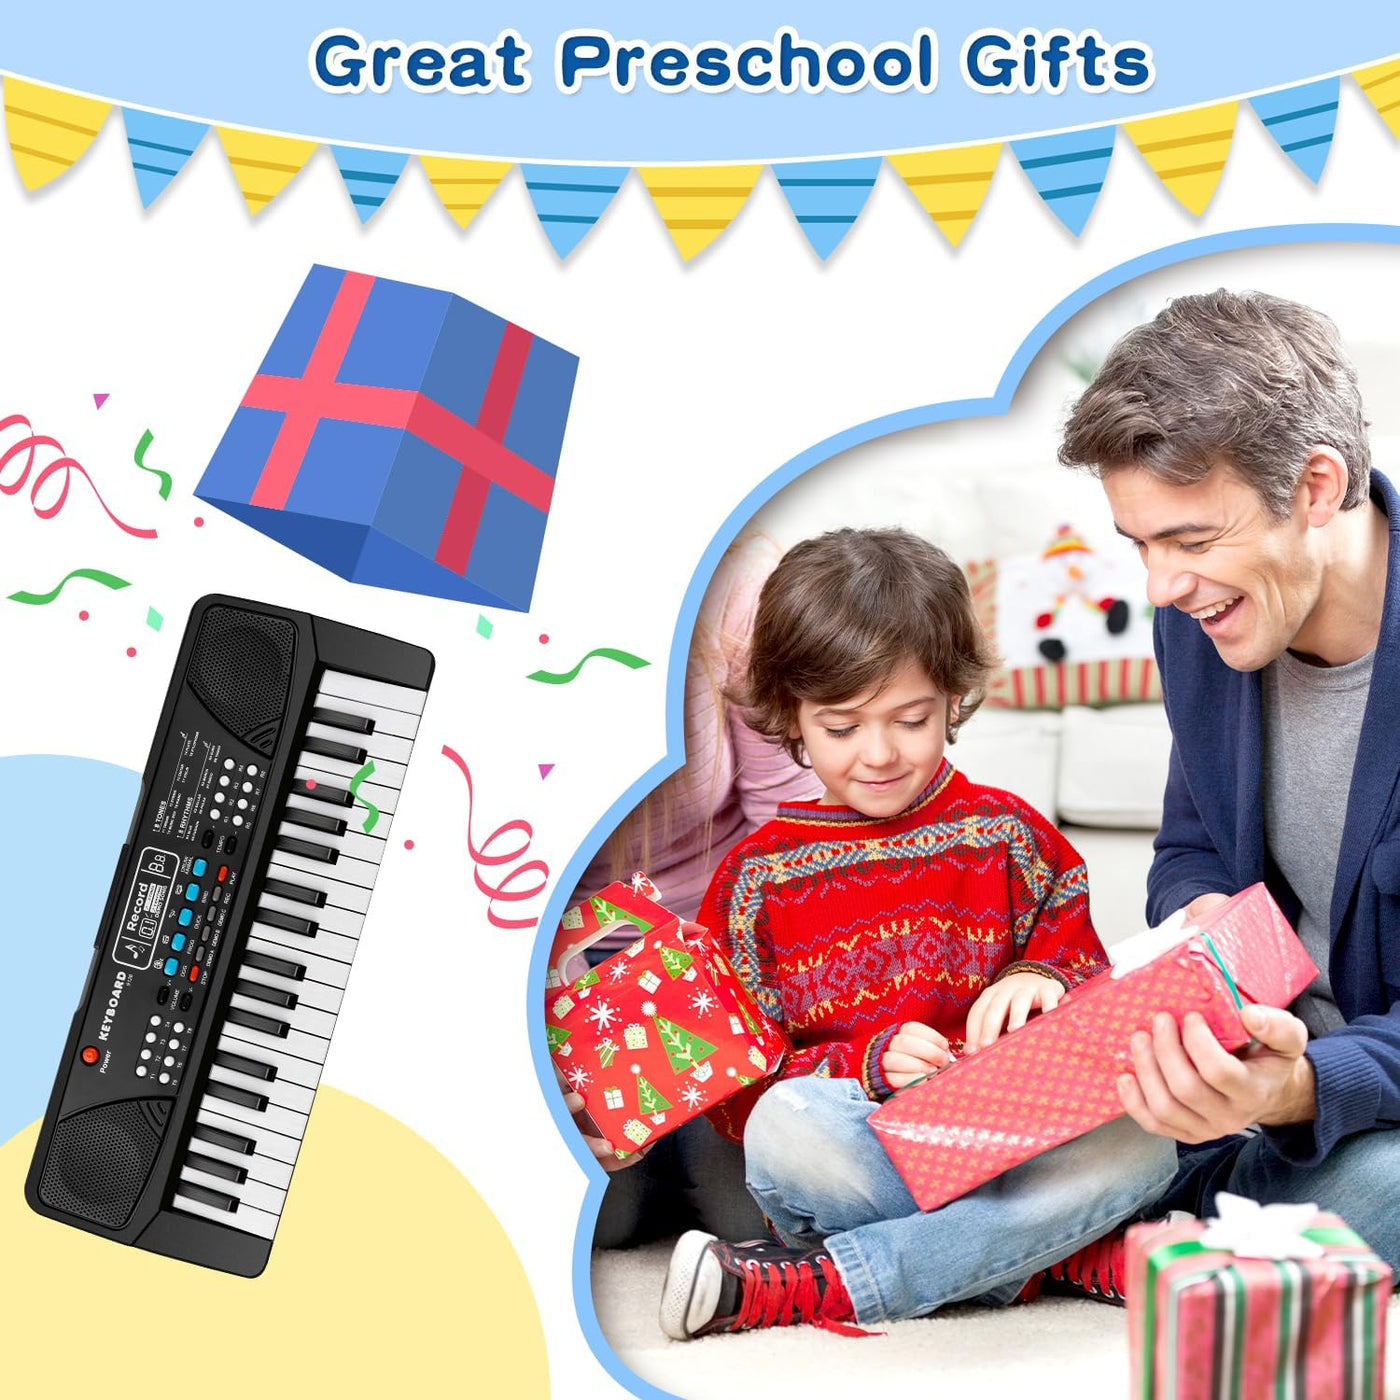 37 Key Piano for Kids Upgrade Piano Keyboard Music Toys for 3+ Year Old